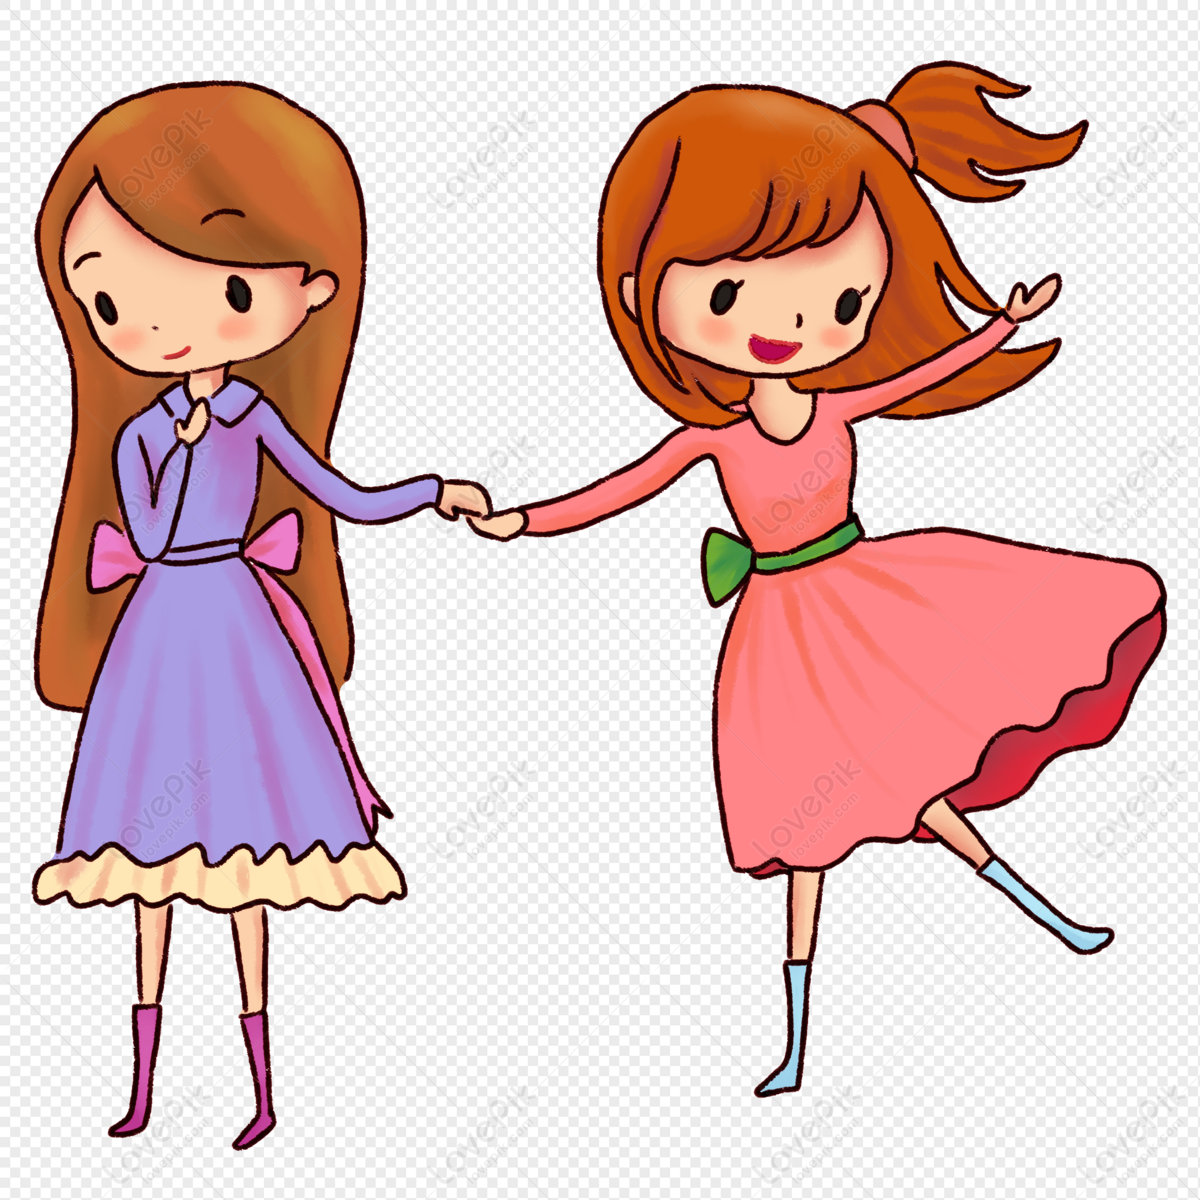 Sisters Free PNG And Clipart Image For Free Download - Lovepik | 401137289